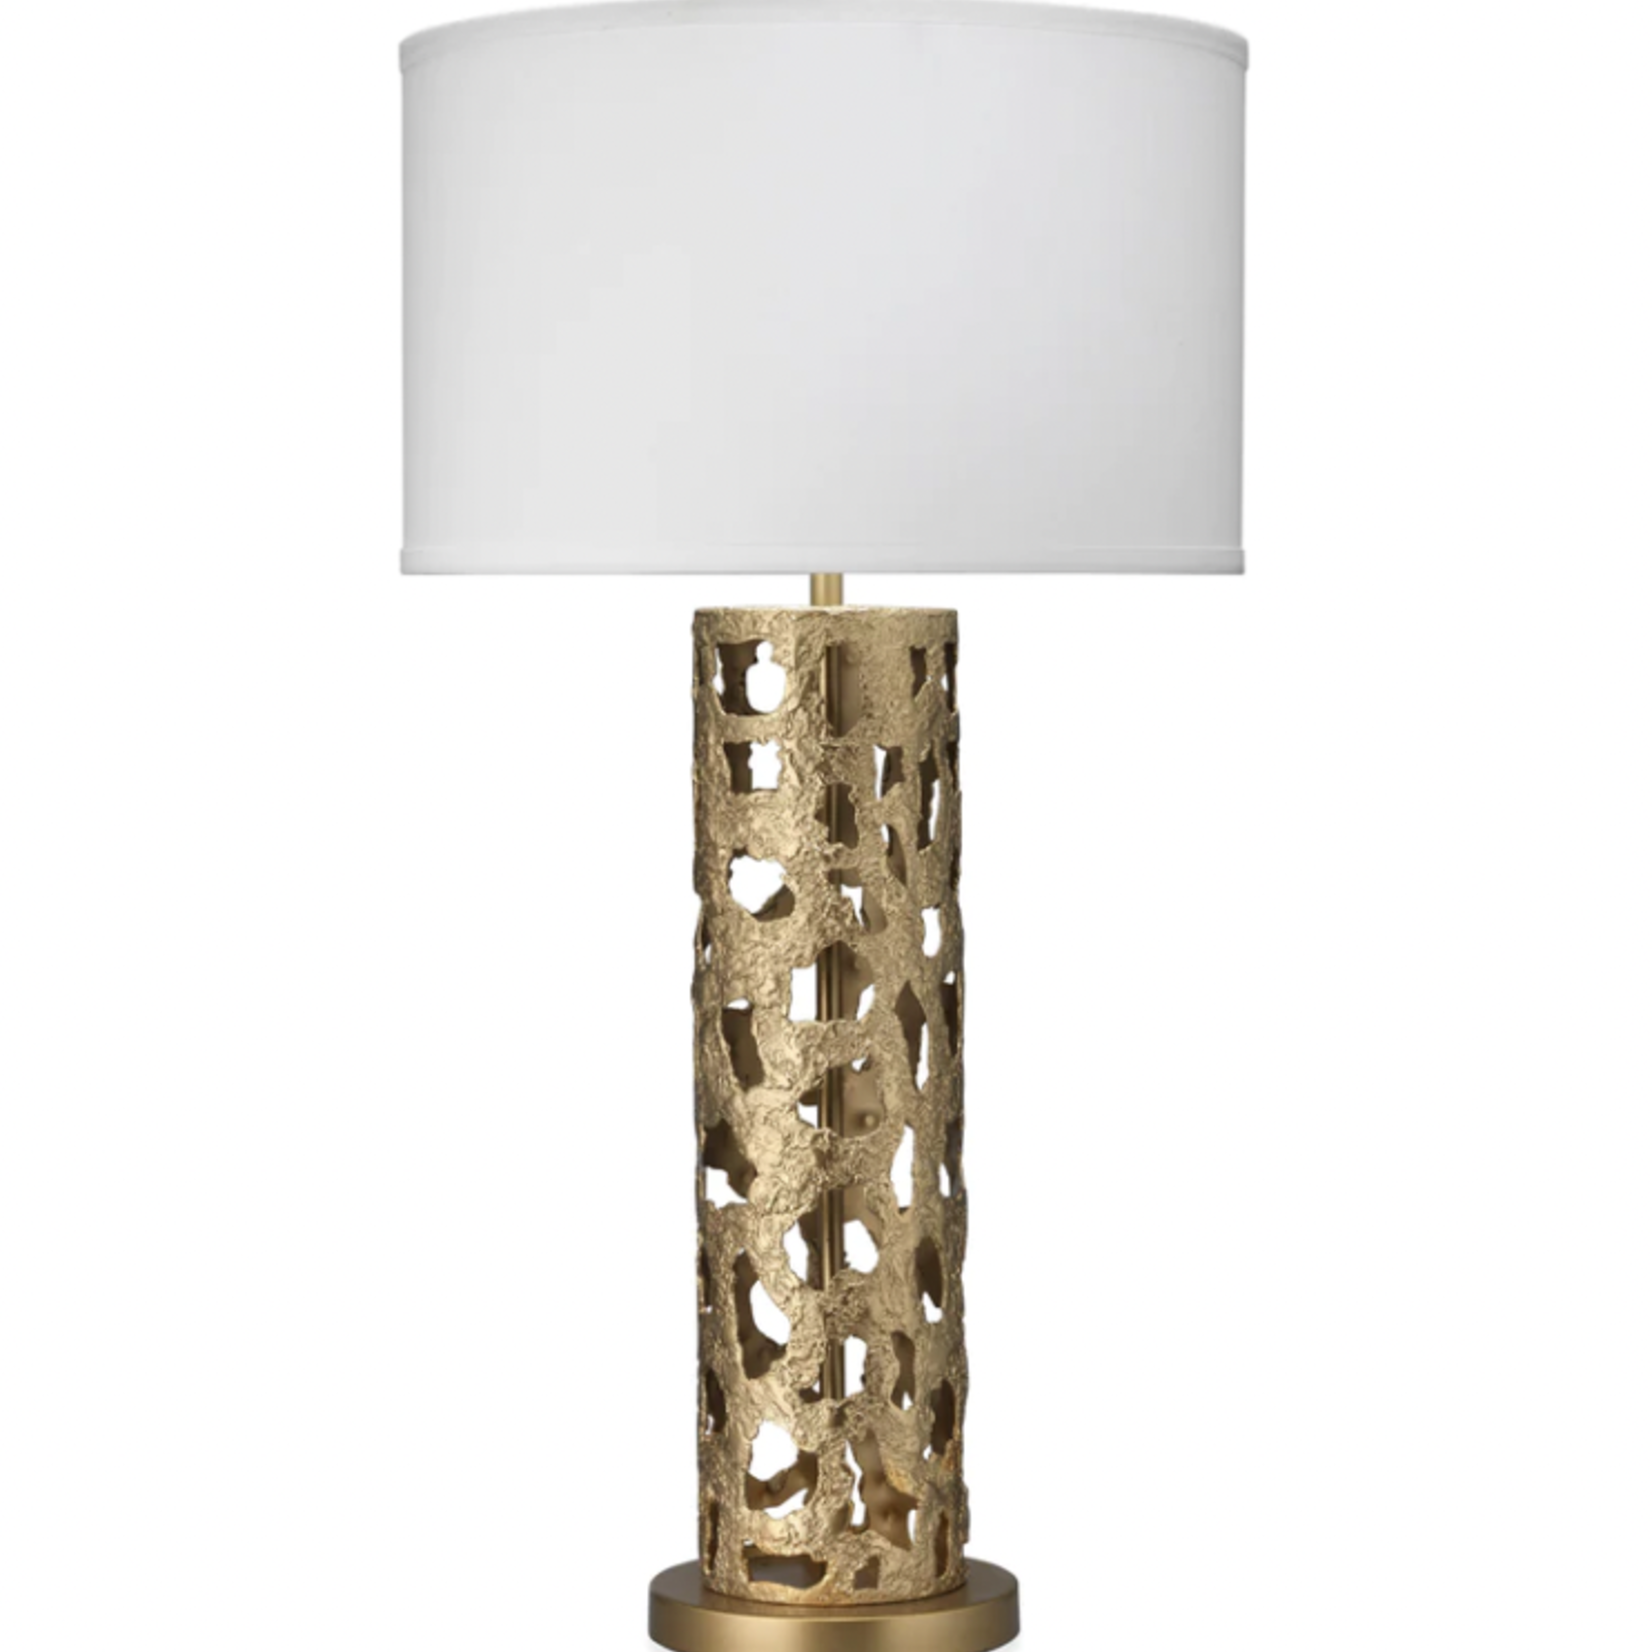 G3 Firenze Table Lamp Gold Leaf